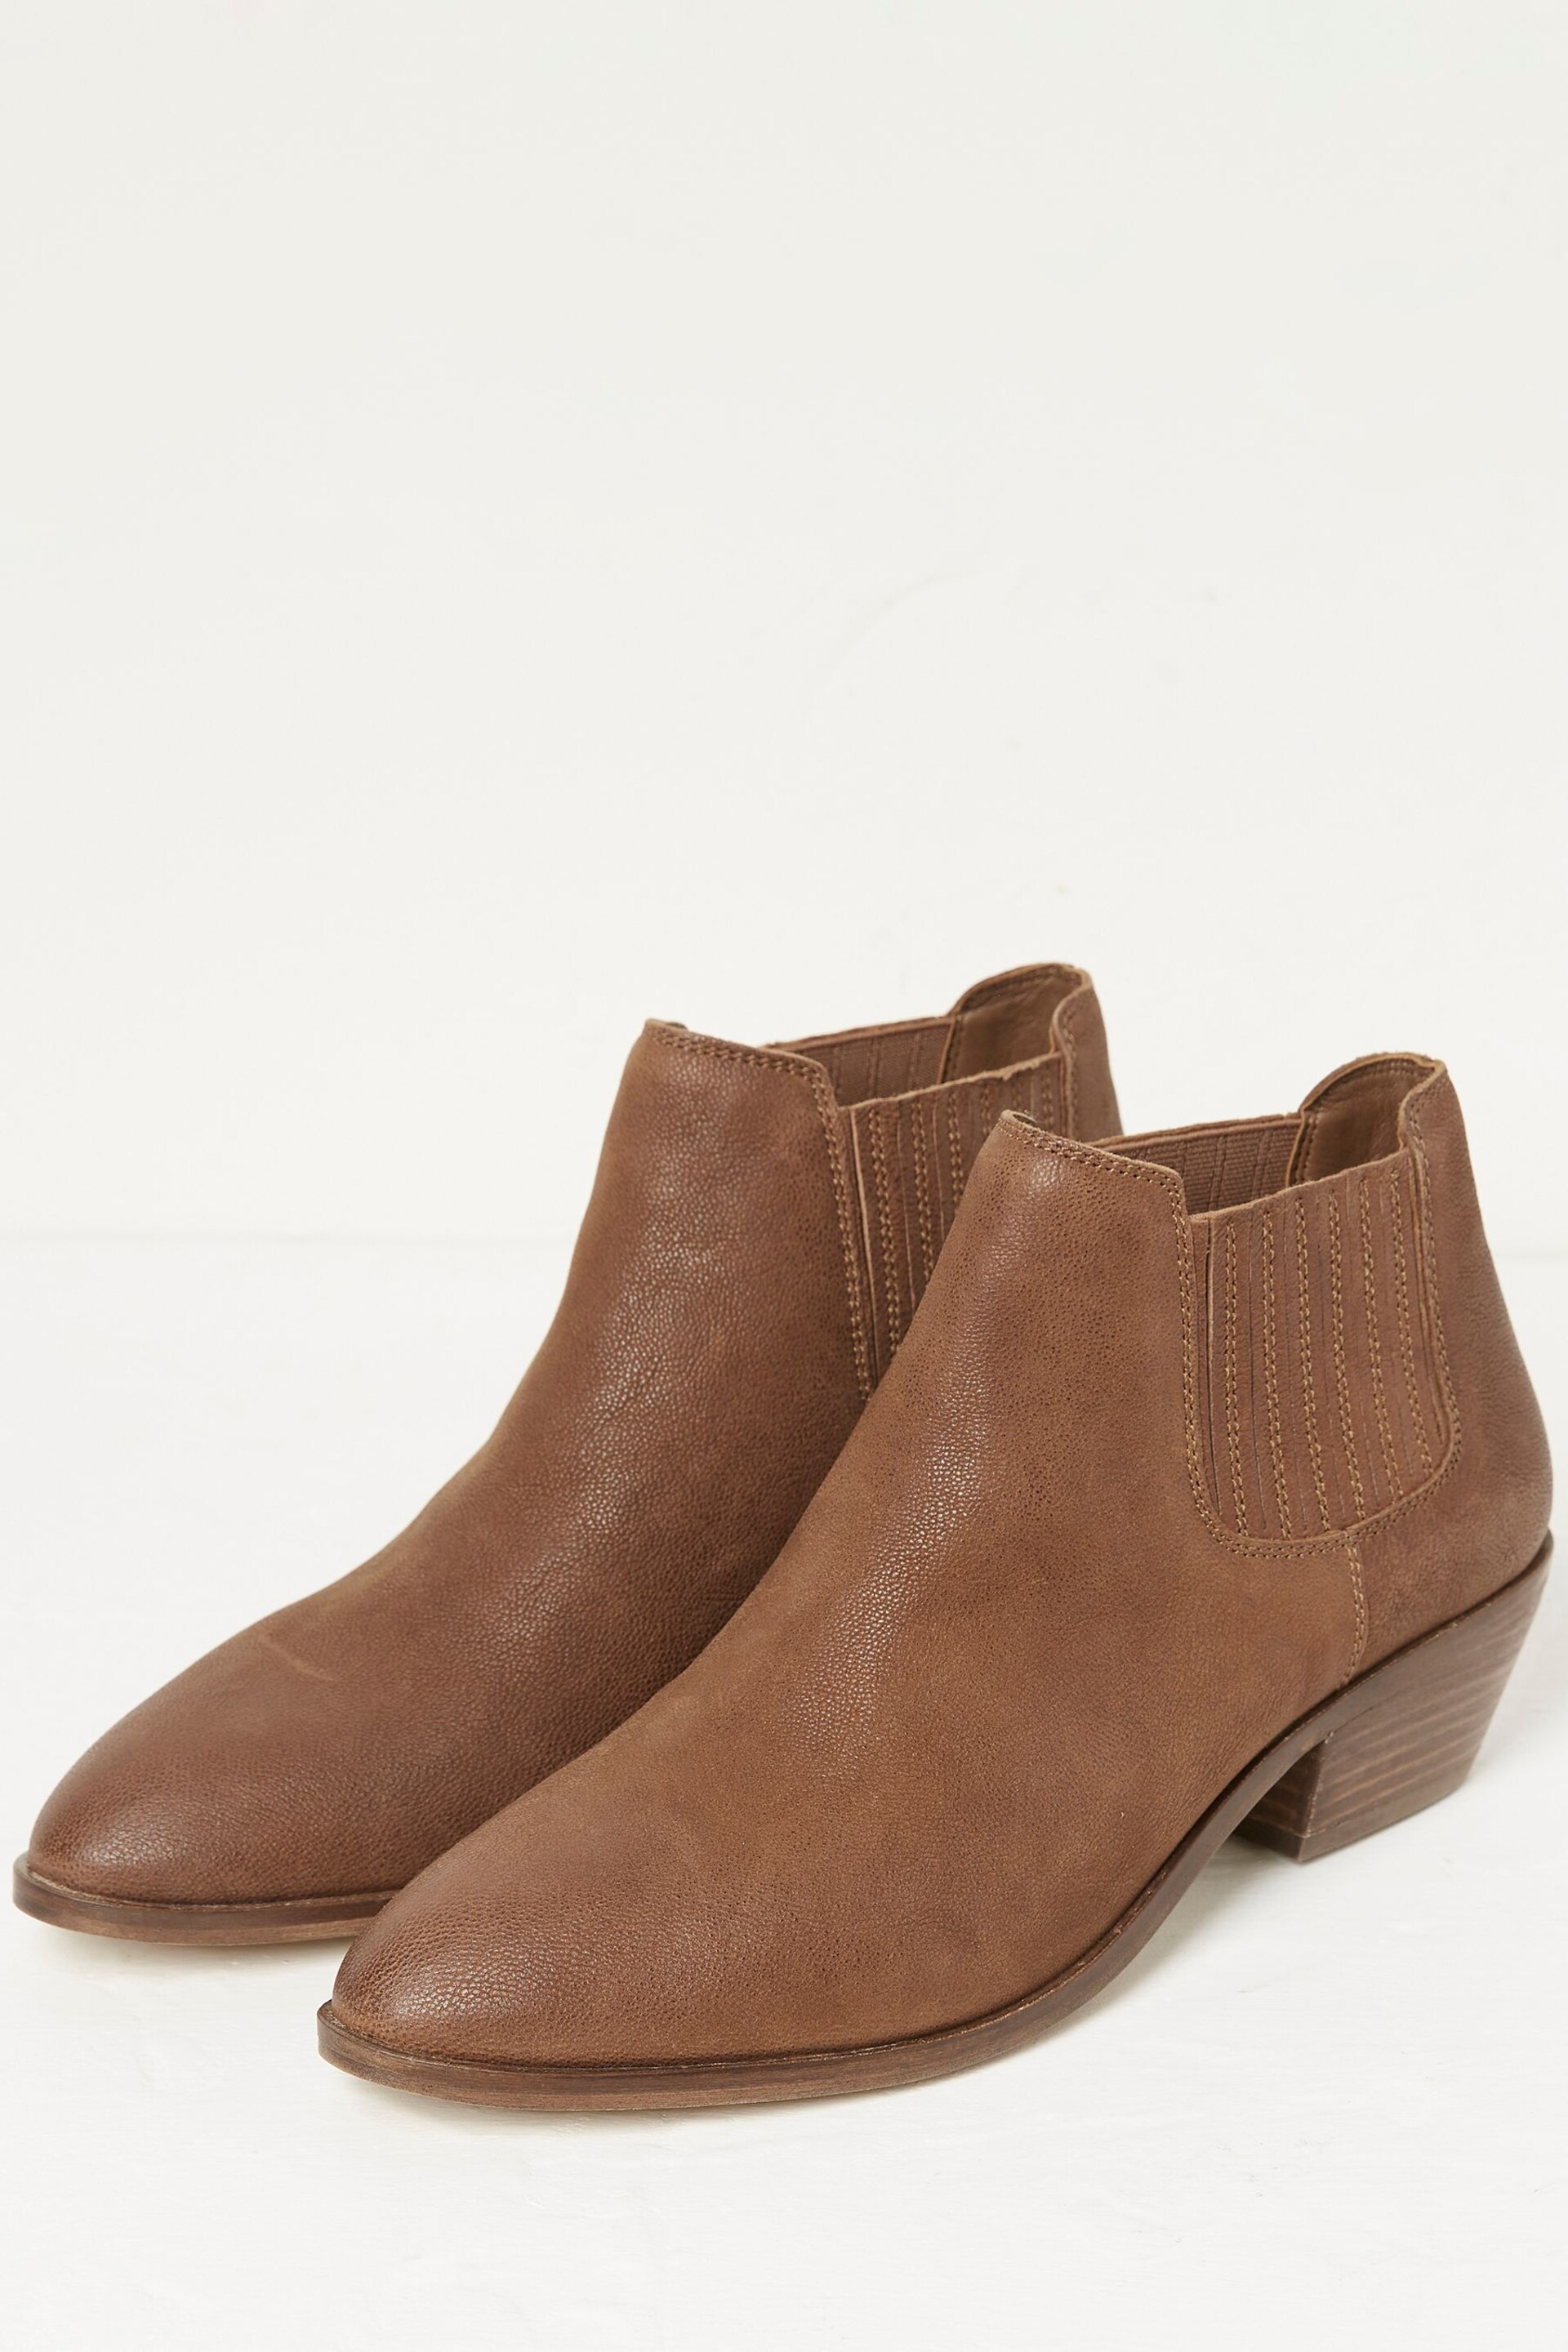 FatFace Brown Ava Western Ankle Boots - Image 2 of 4